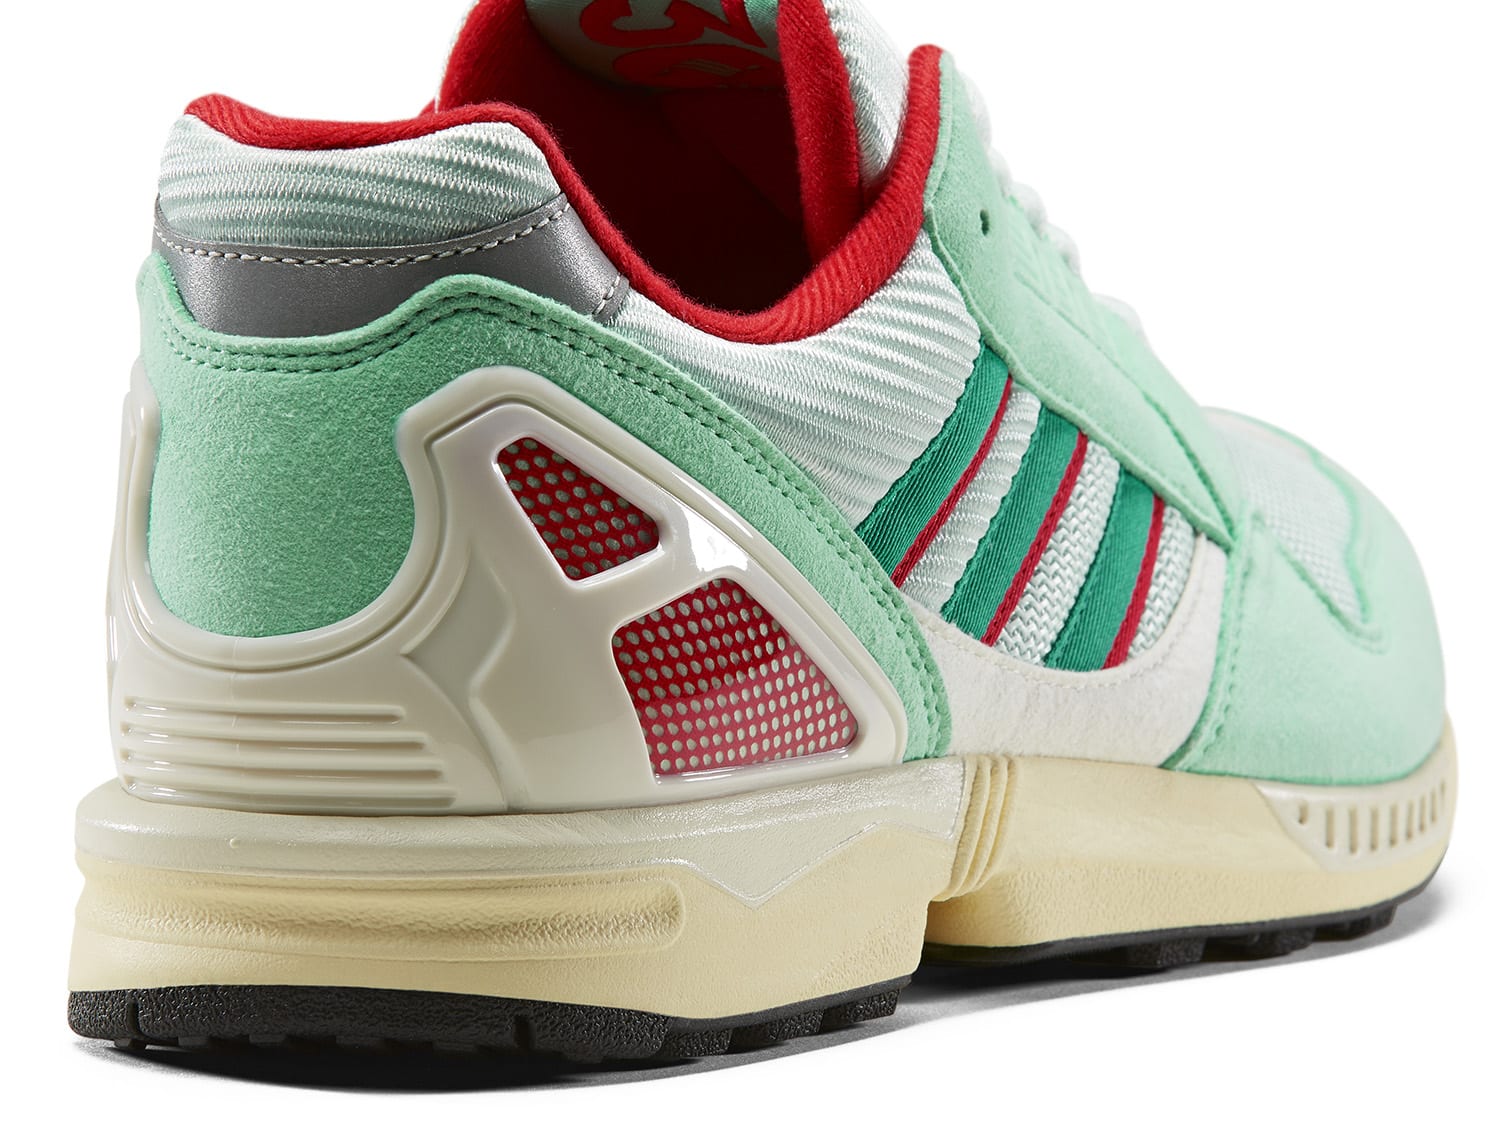 adidas ZX 9000 OG 30 years of Torsion 6